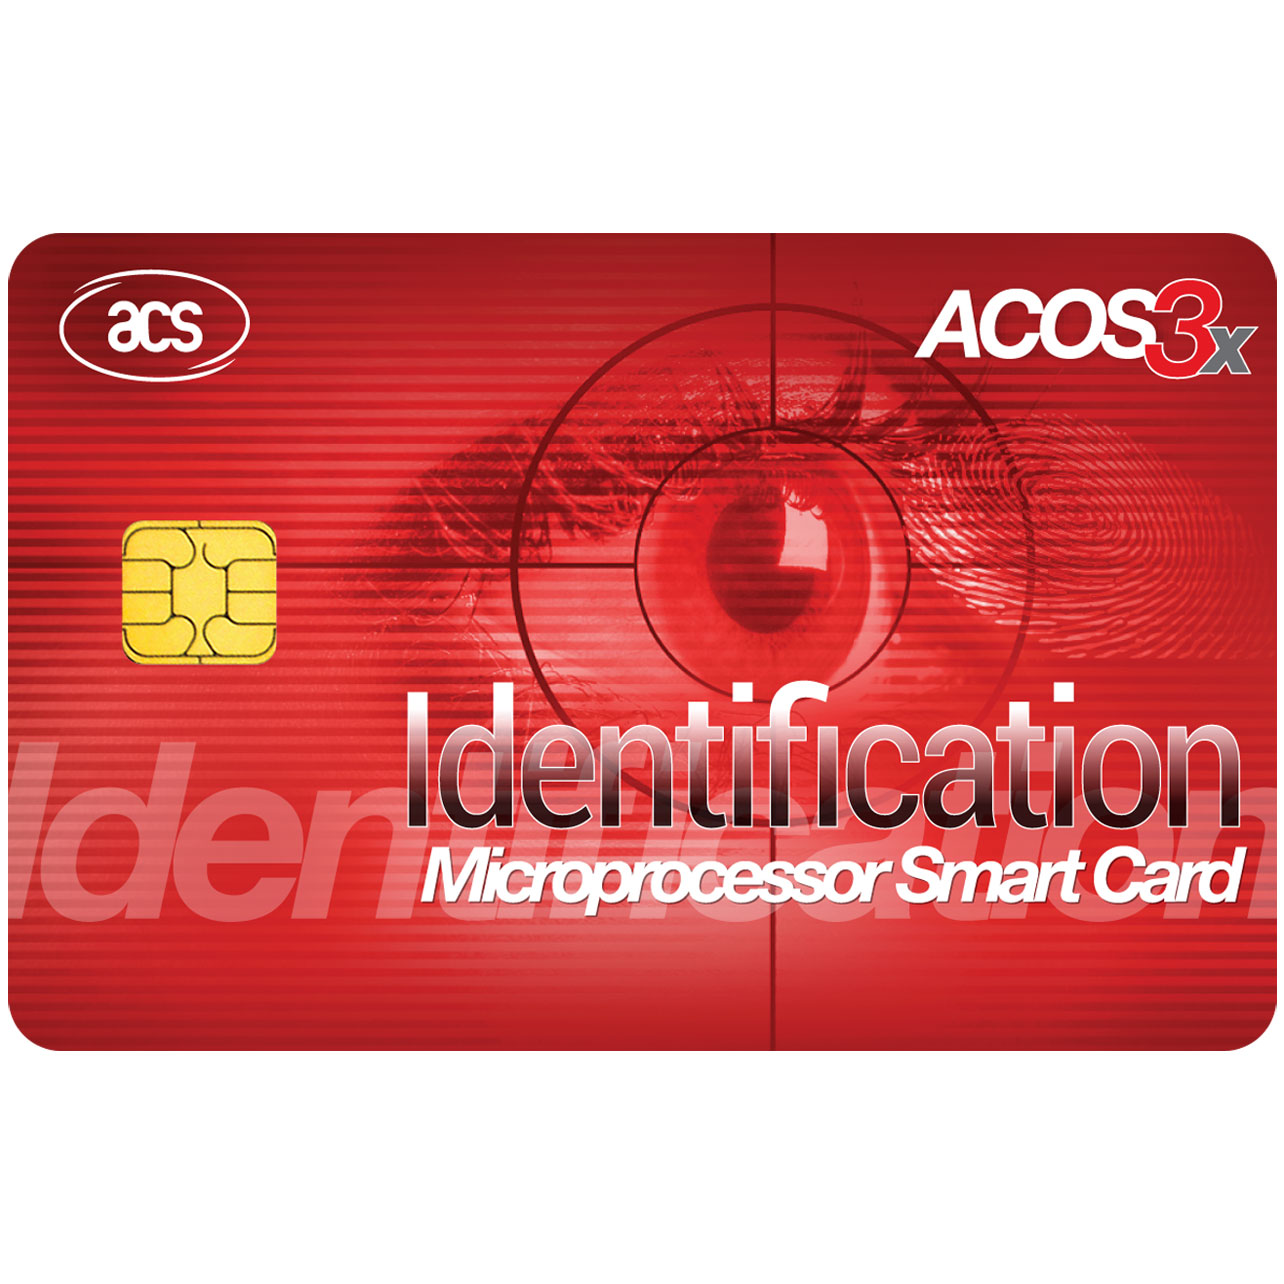 ACOS3x eXpress Series Microprocessor Smart Cards